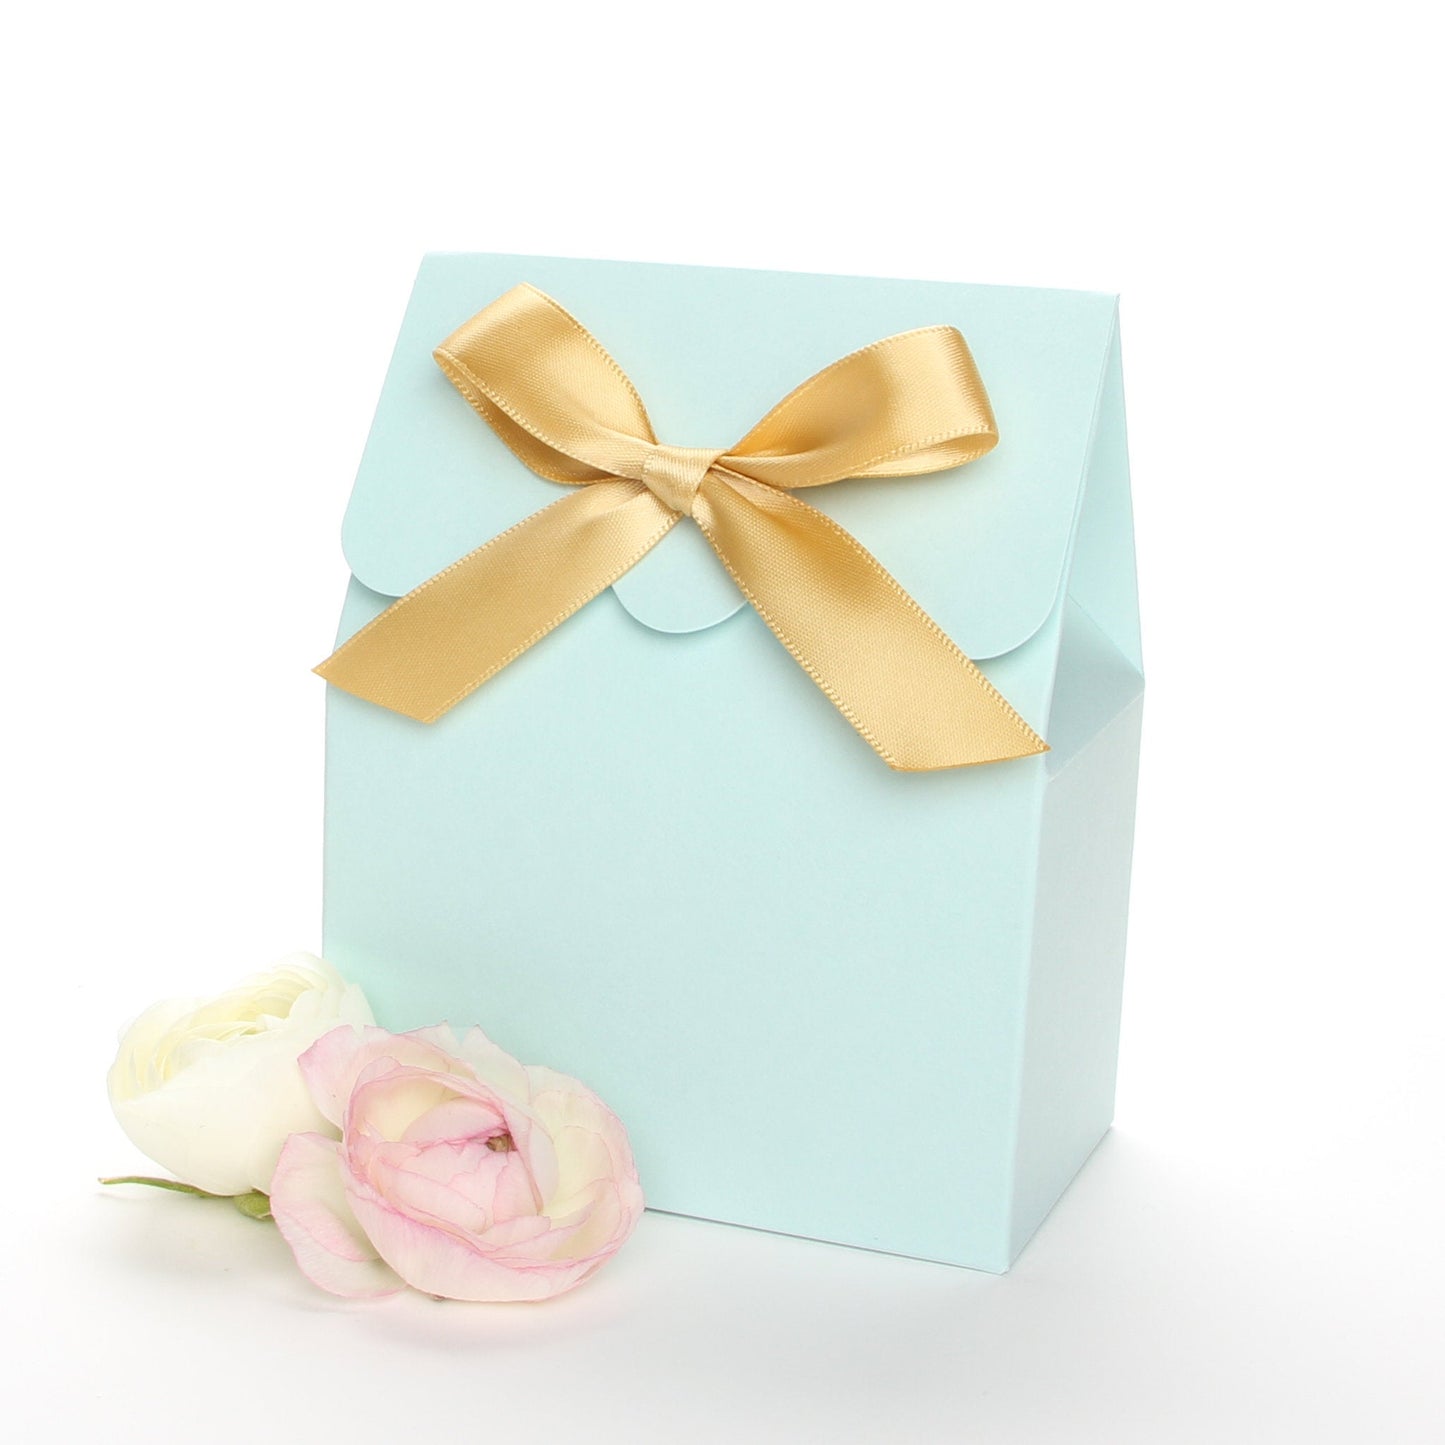 Lux Party’s light blue favor box with a scalloped edge and a gold satin bow next to pink and white ranunculus flowers.